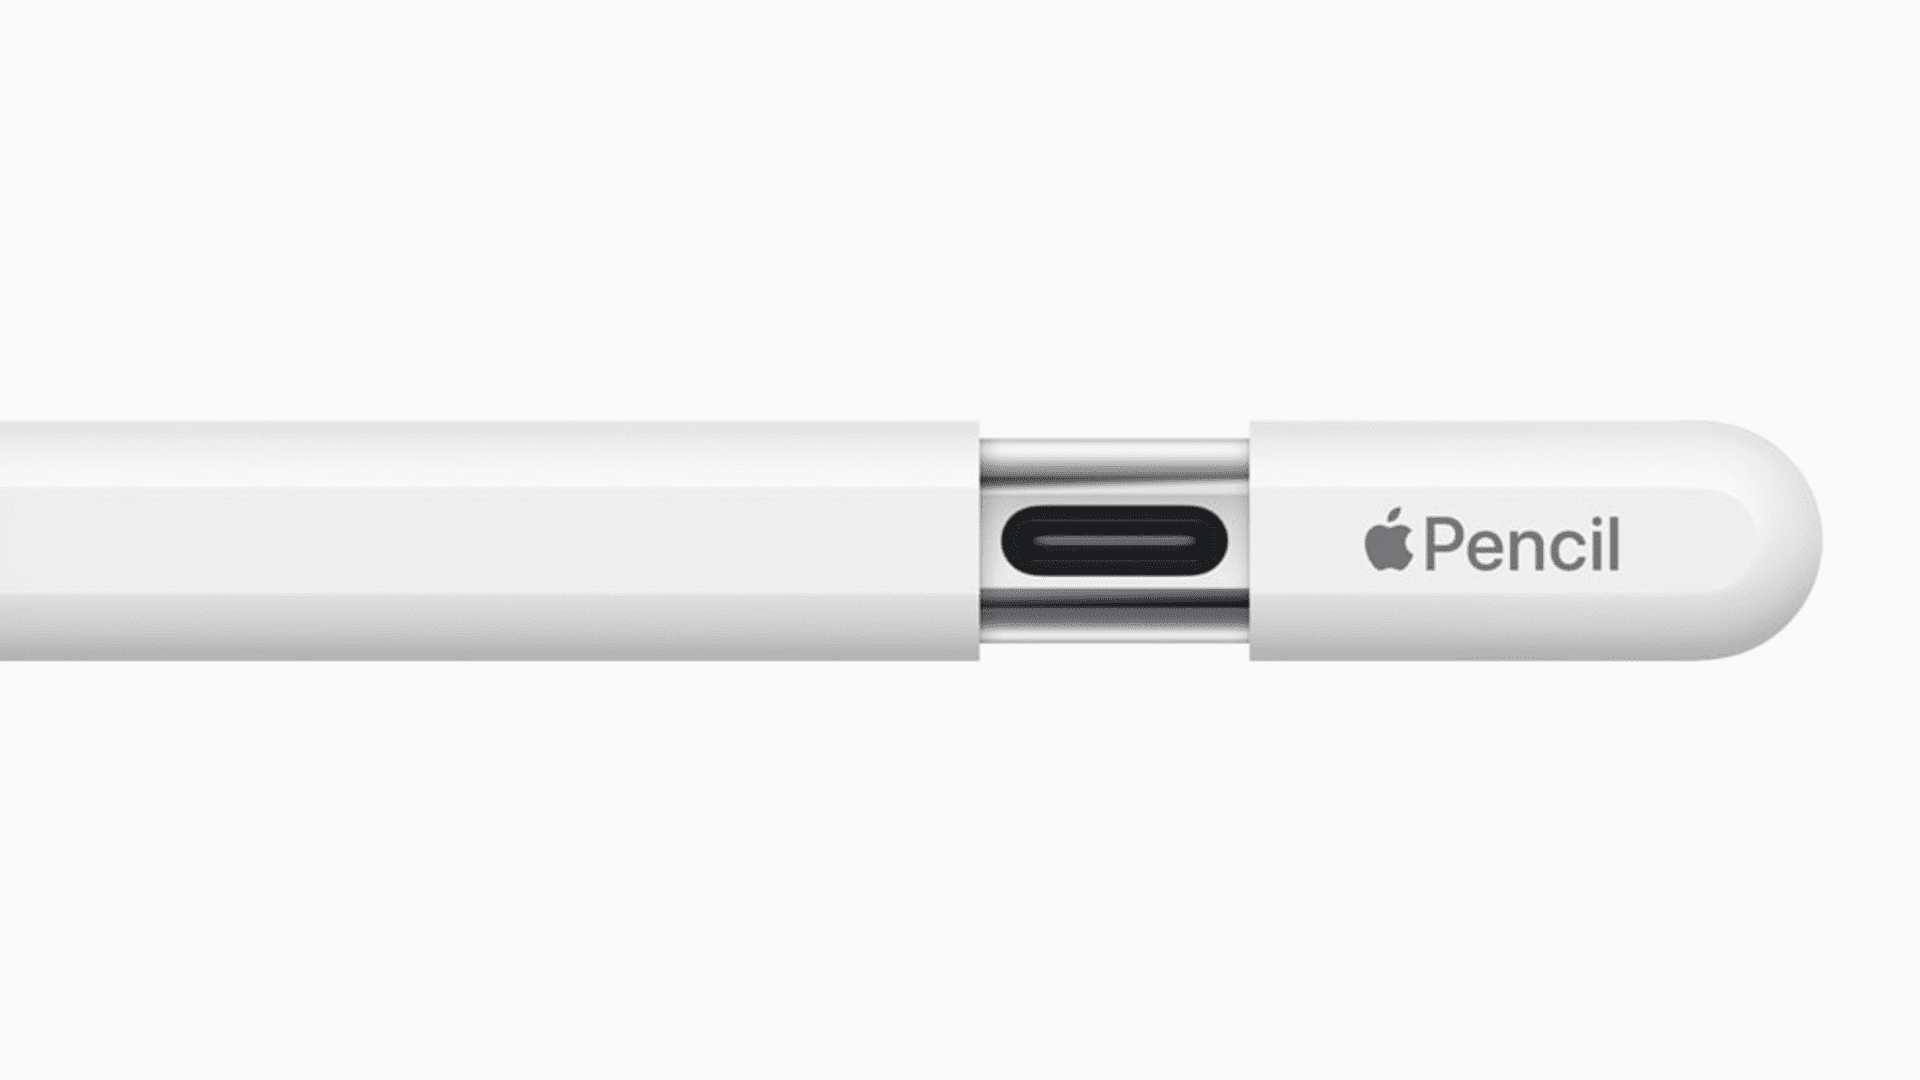 Apple launches new Apple Pencil with hidden USB-C charging port